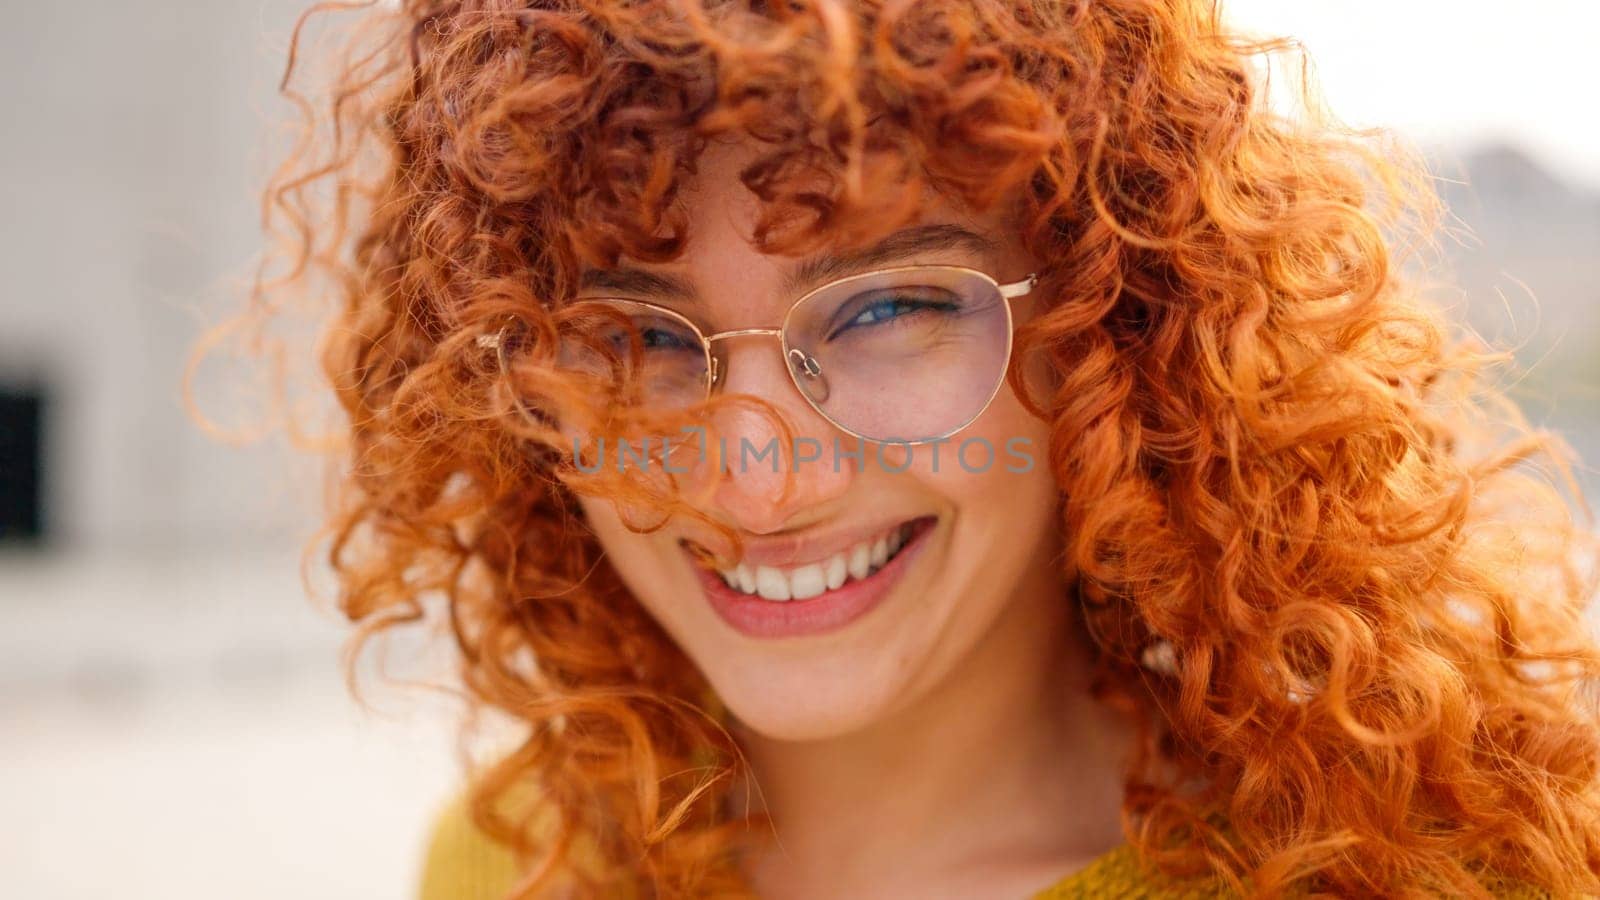 Redhead woman with curly long hair smiling at camera by ivanmoreno